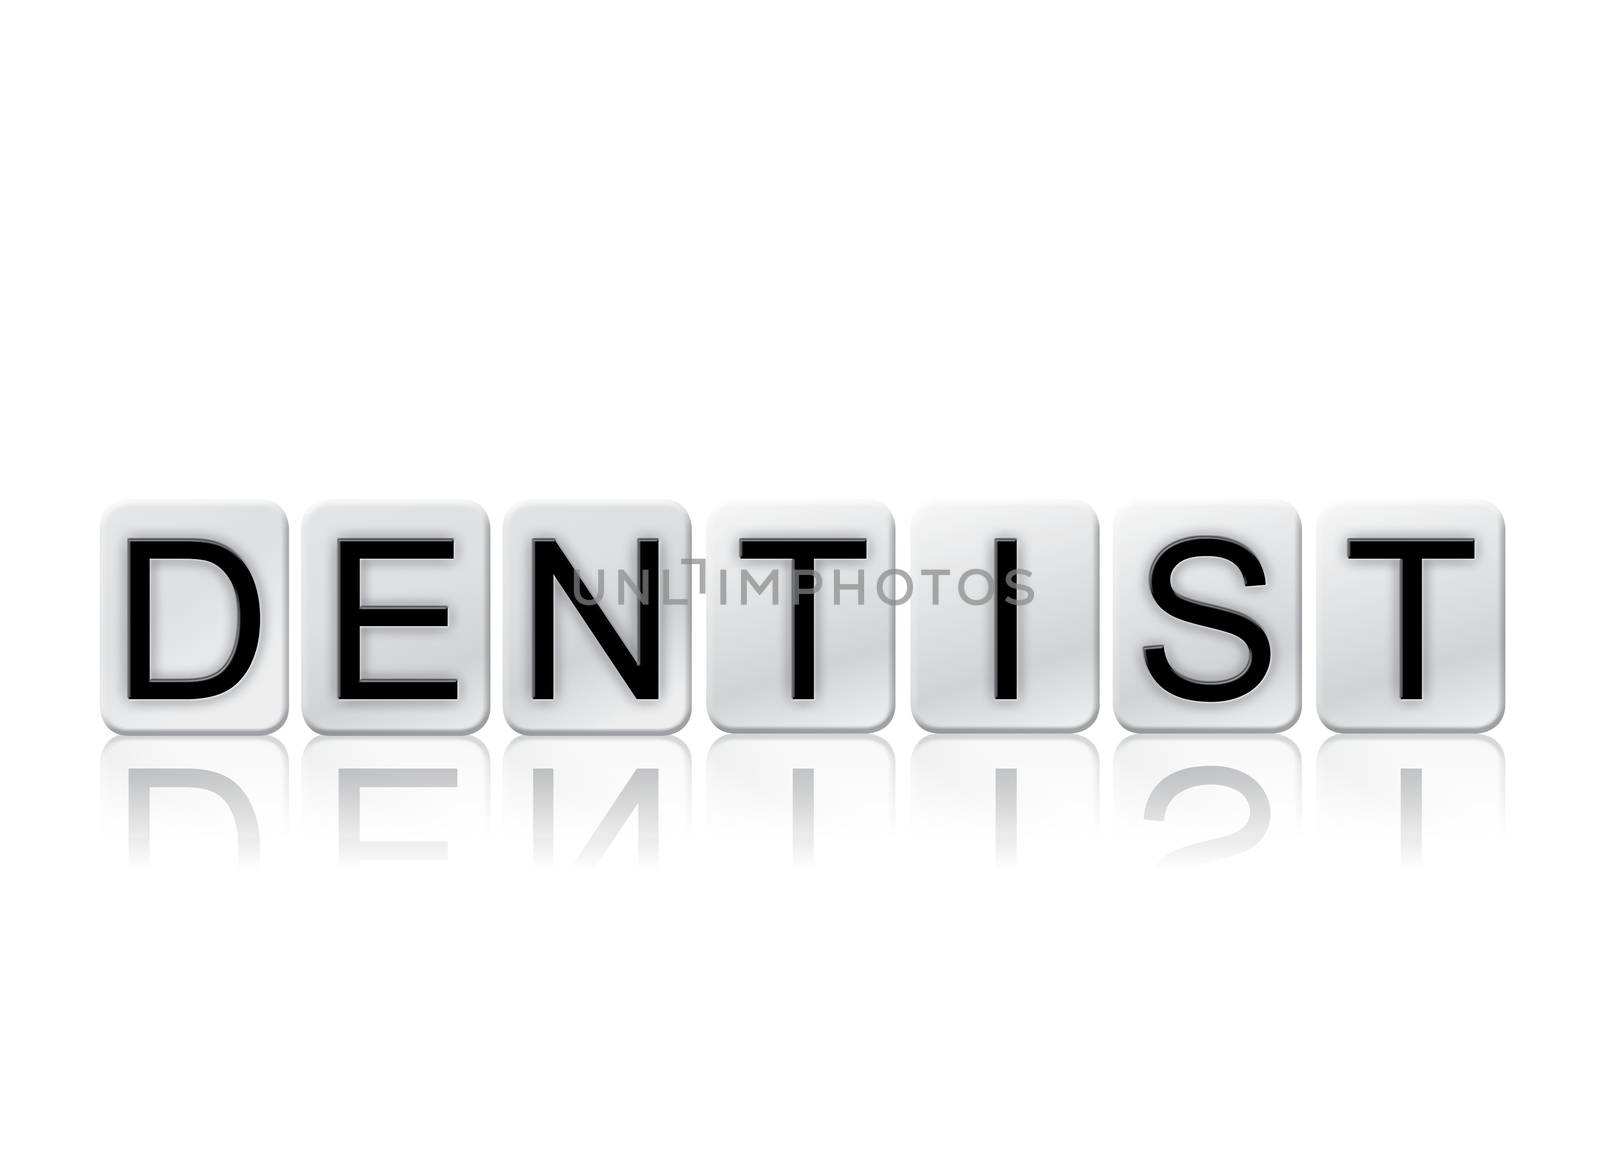 Dentist Isolated Tiled Letters Concept and Theme by enterlinedesign